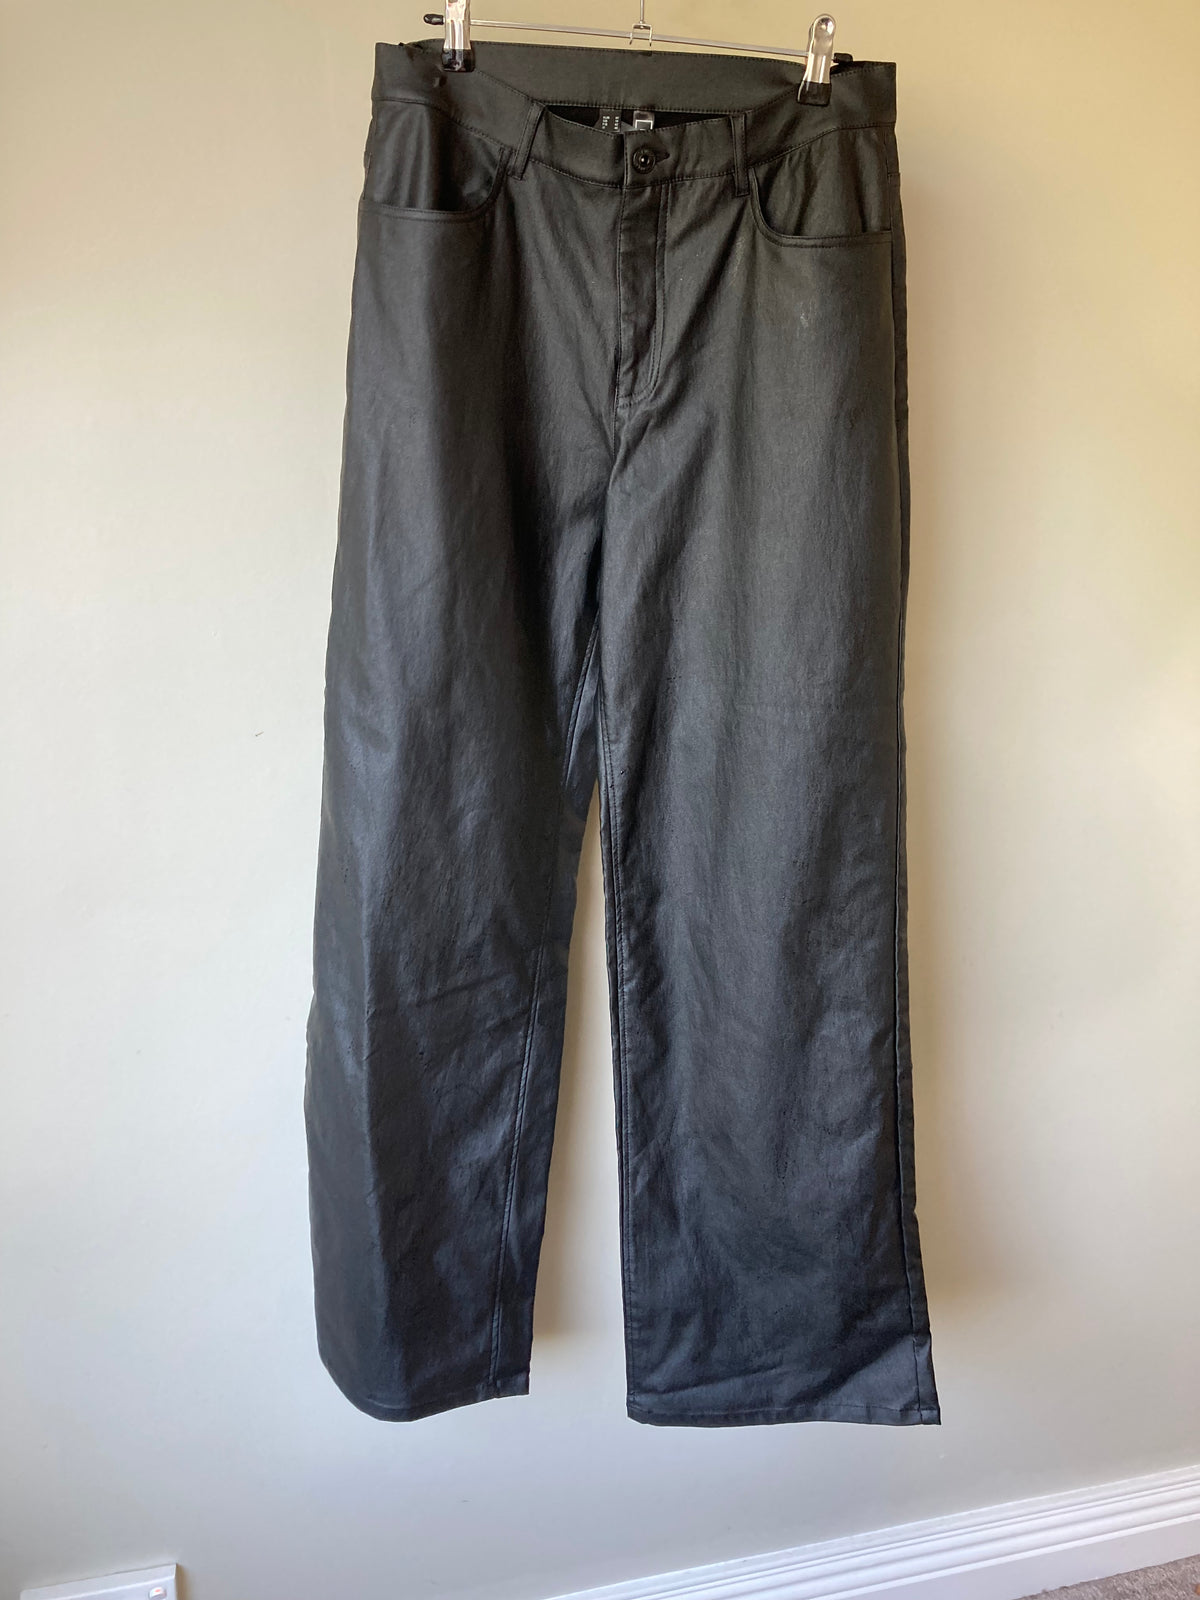 Wide leg pleather trousers by Rainbow - Size 14